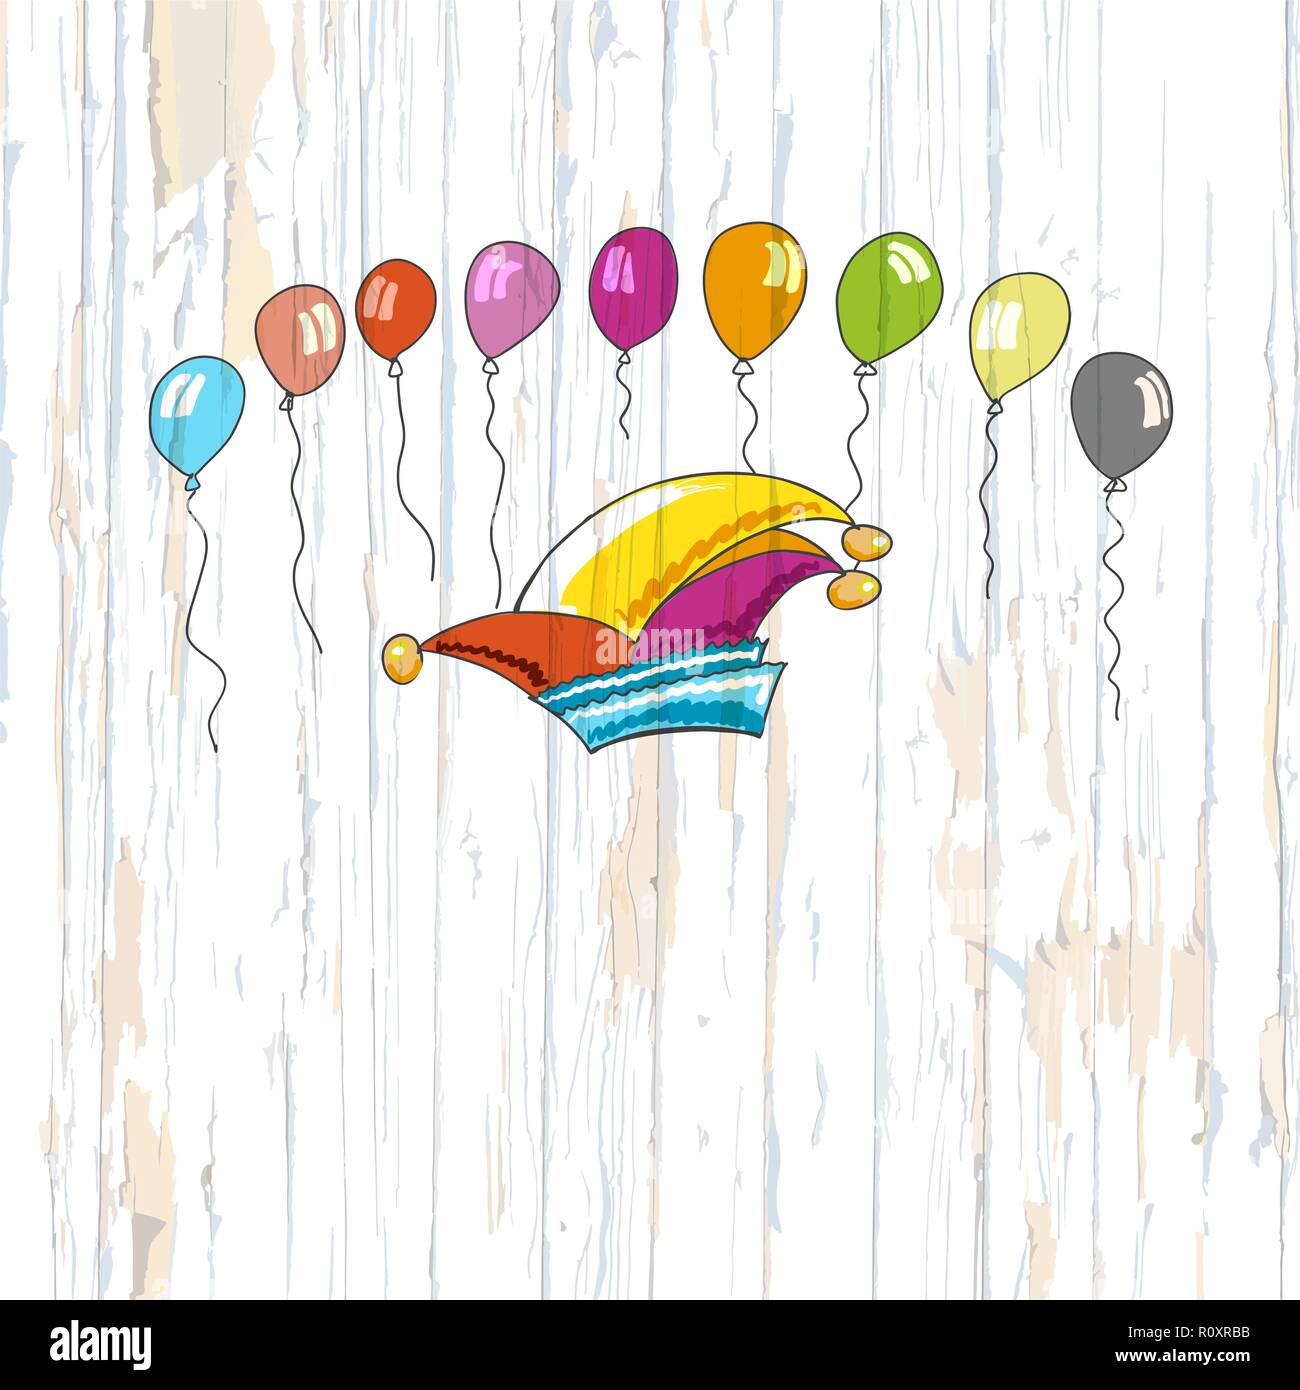 Carnival heat and balloons on wooden background. Vector illustration drawn by hand. Stock Vector